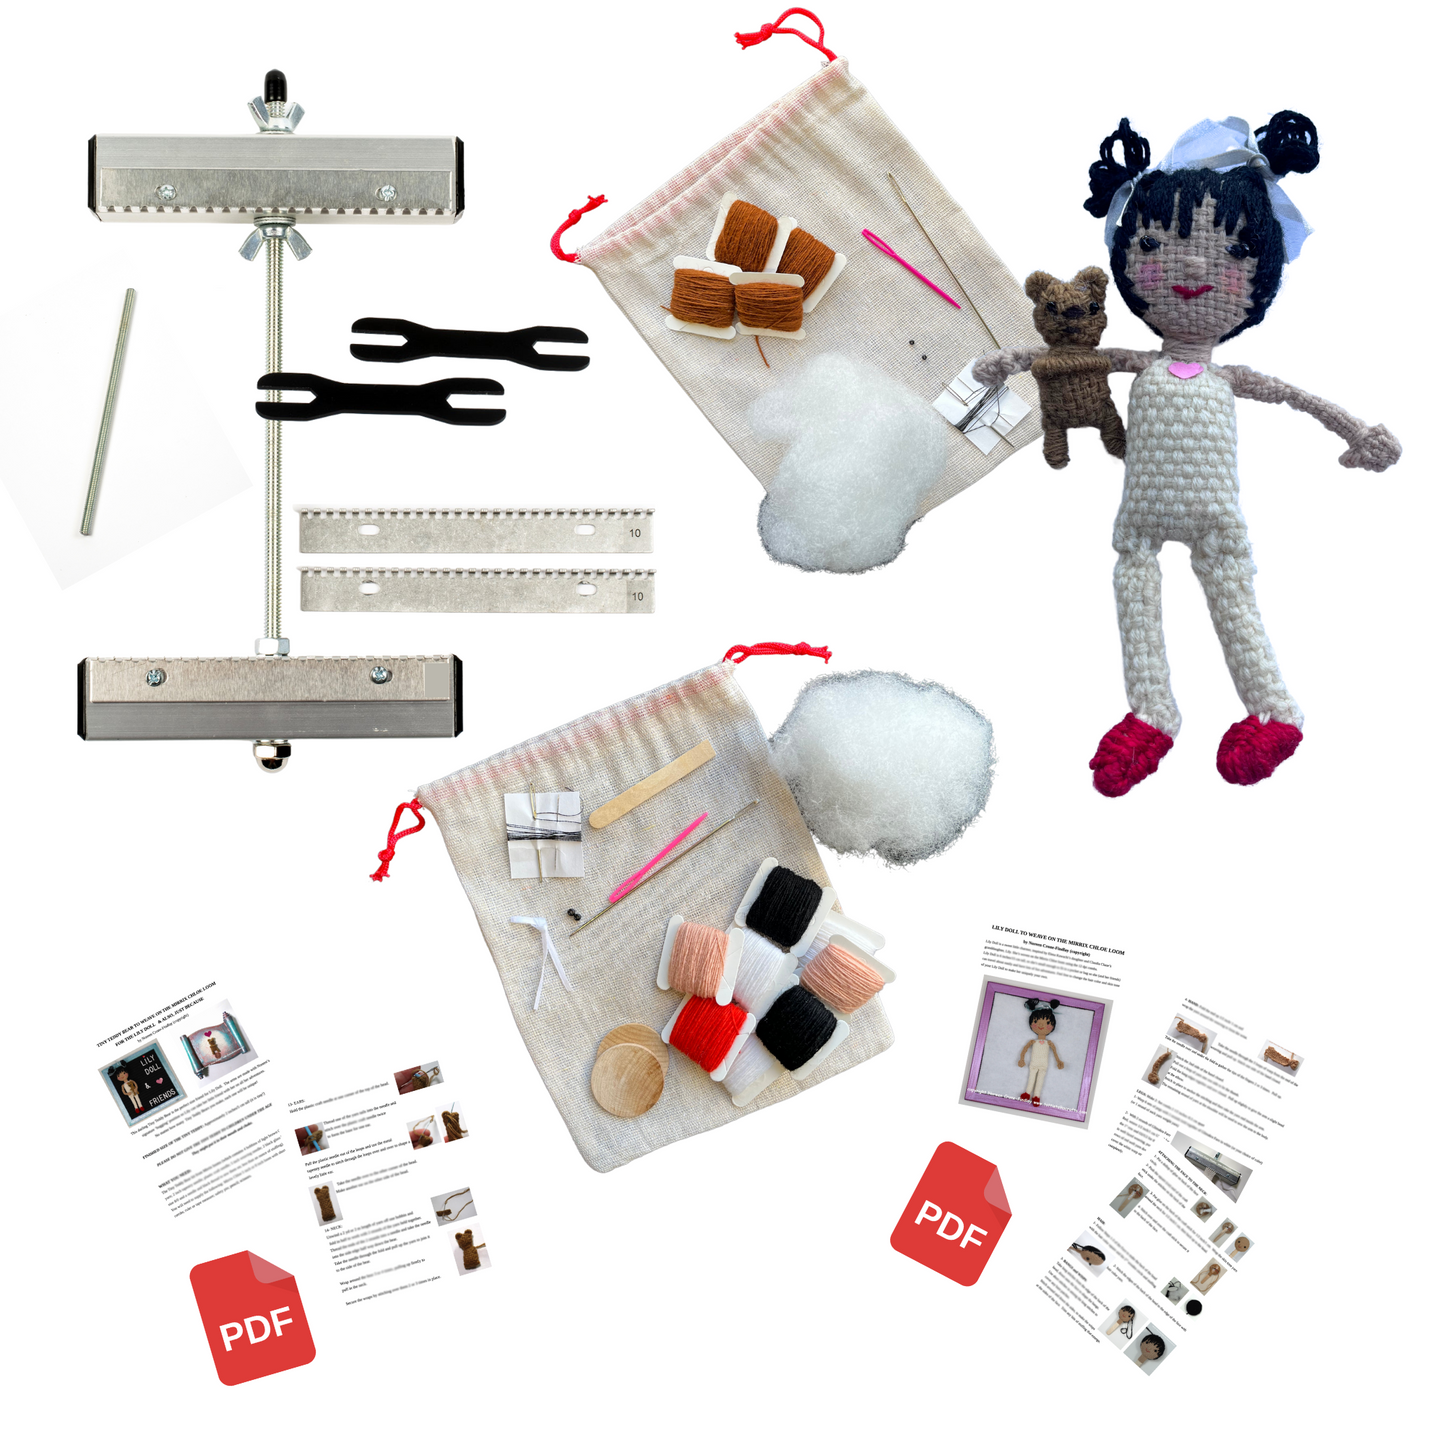 The Complete Lily Doll Loom and Kit Starter Package